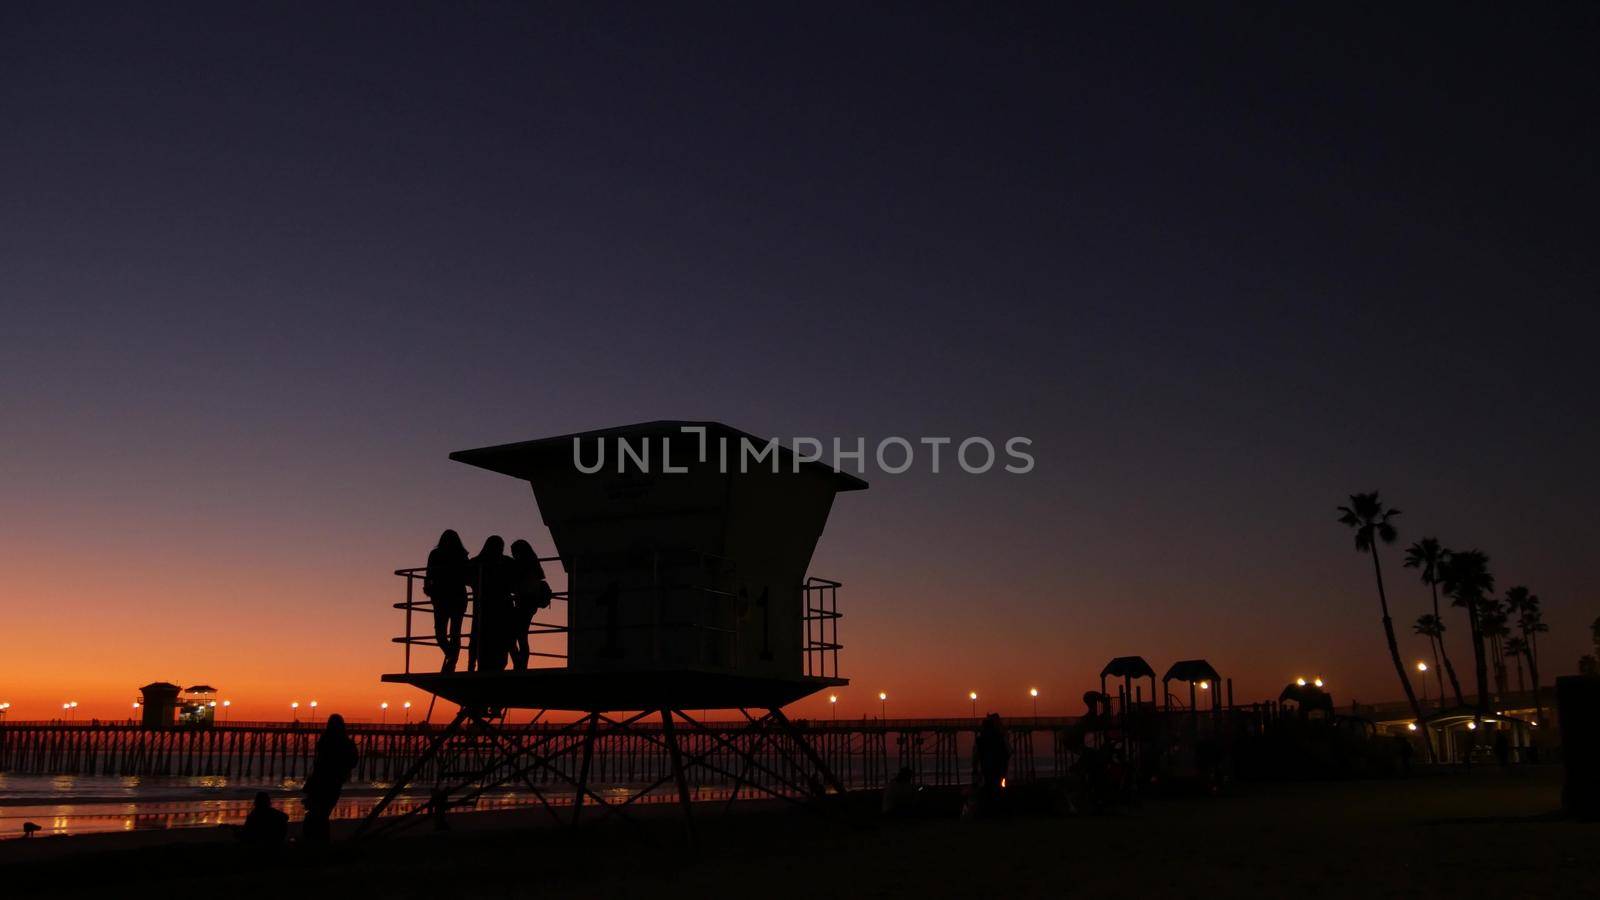 Oceanside, California USA - 8 Feb 2020: Young teen girls near lifeguard tower, friends on pacific ocean beach, sunset dusk. Unrecognizable teenagers, people and twilight gradient purple violet sky.